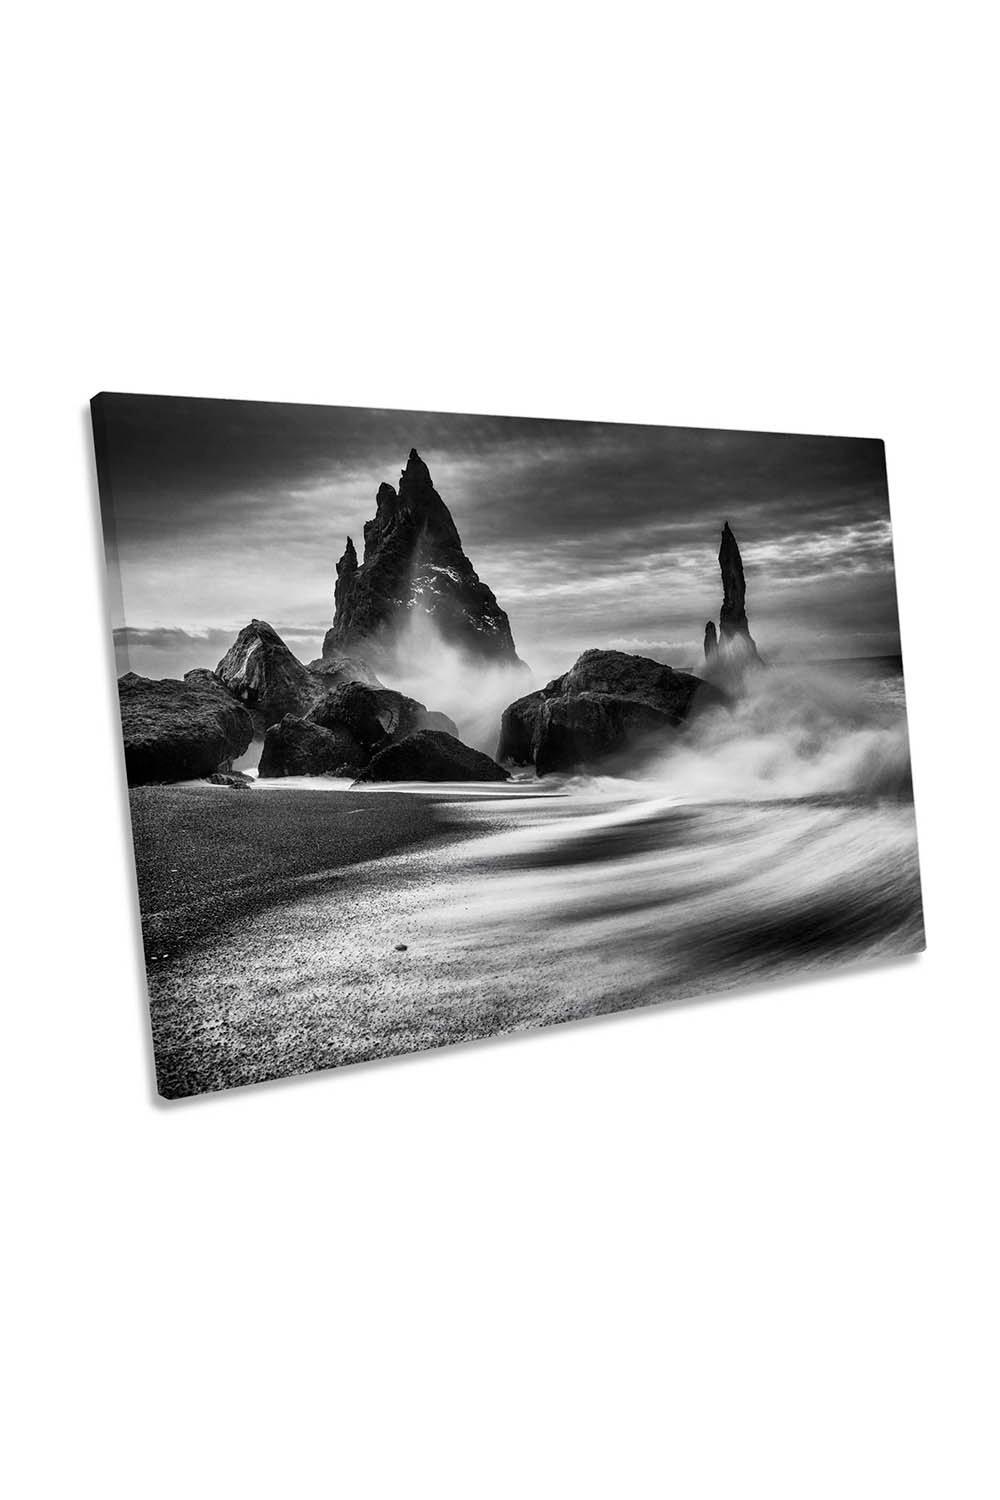 Iceland Rocks Ocean Seascape Black and White Canvas Wall Art Picture Print